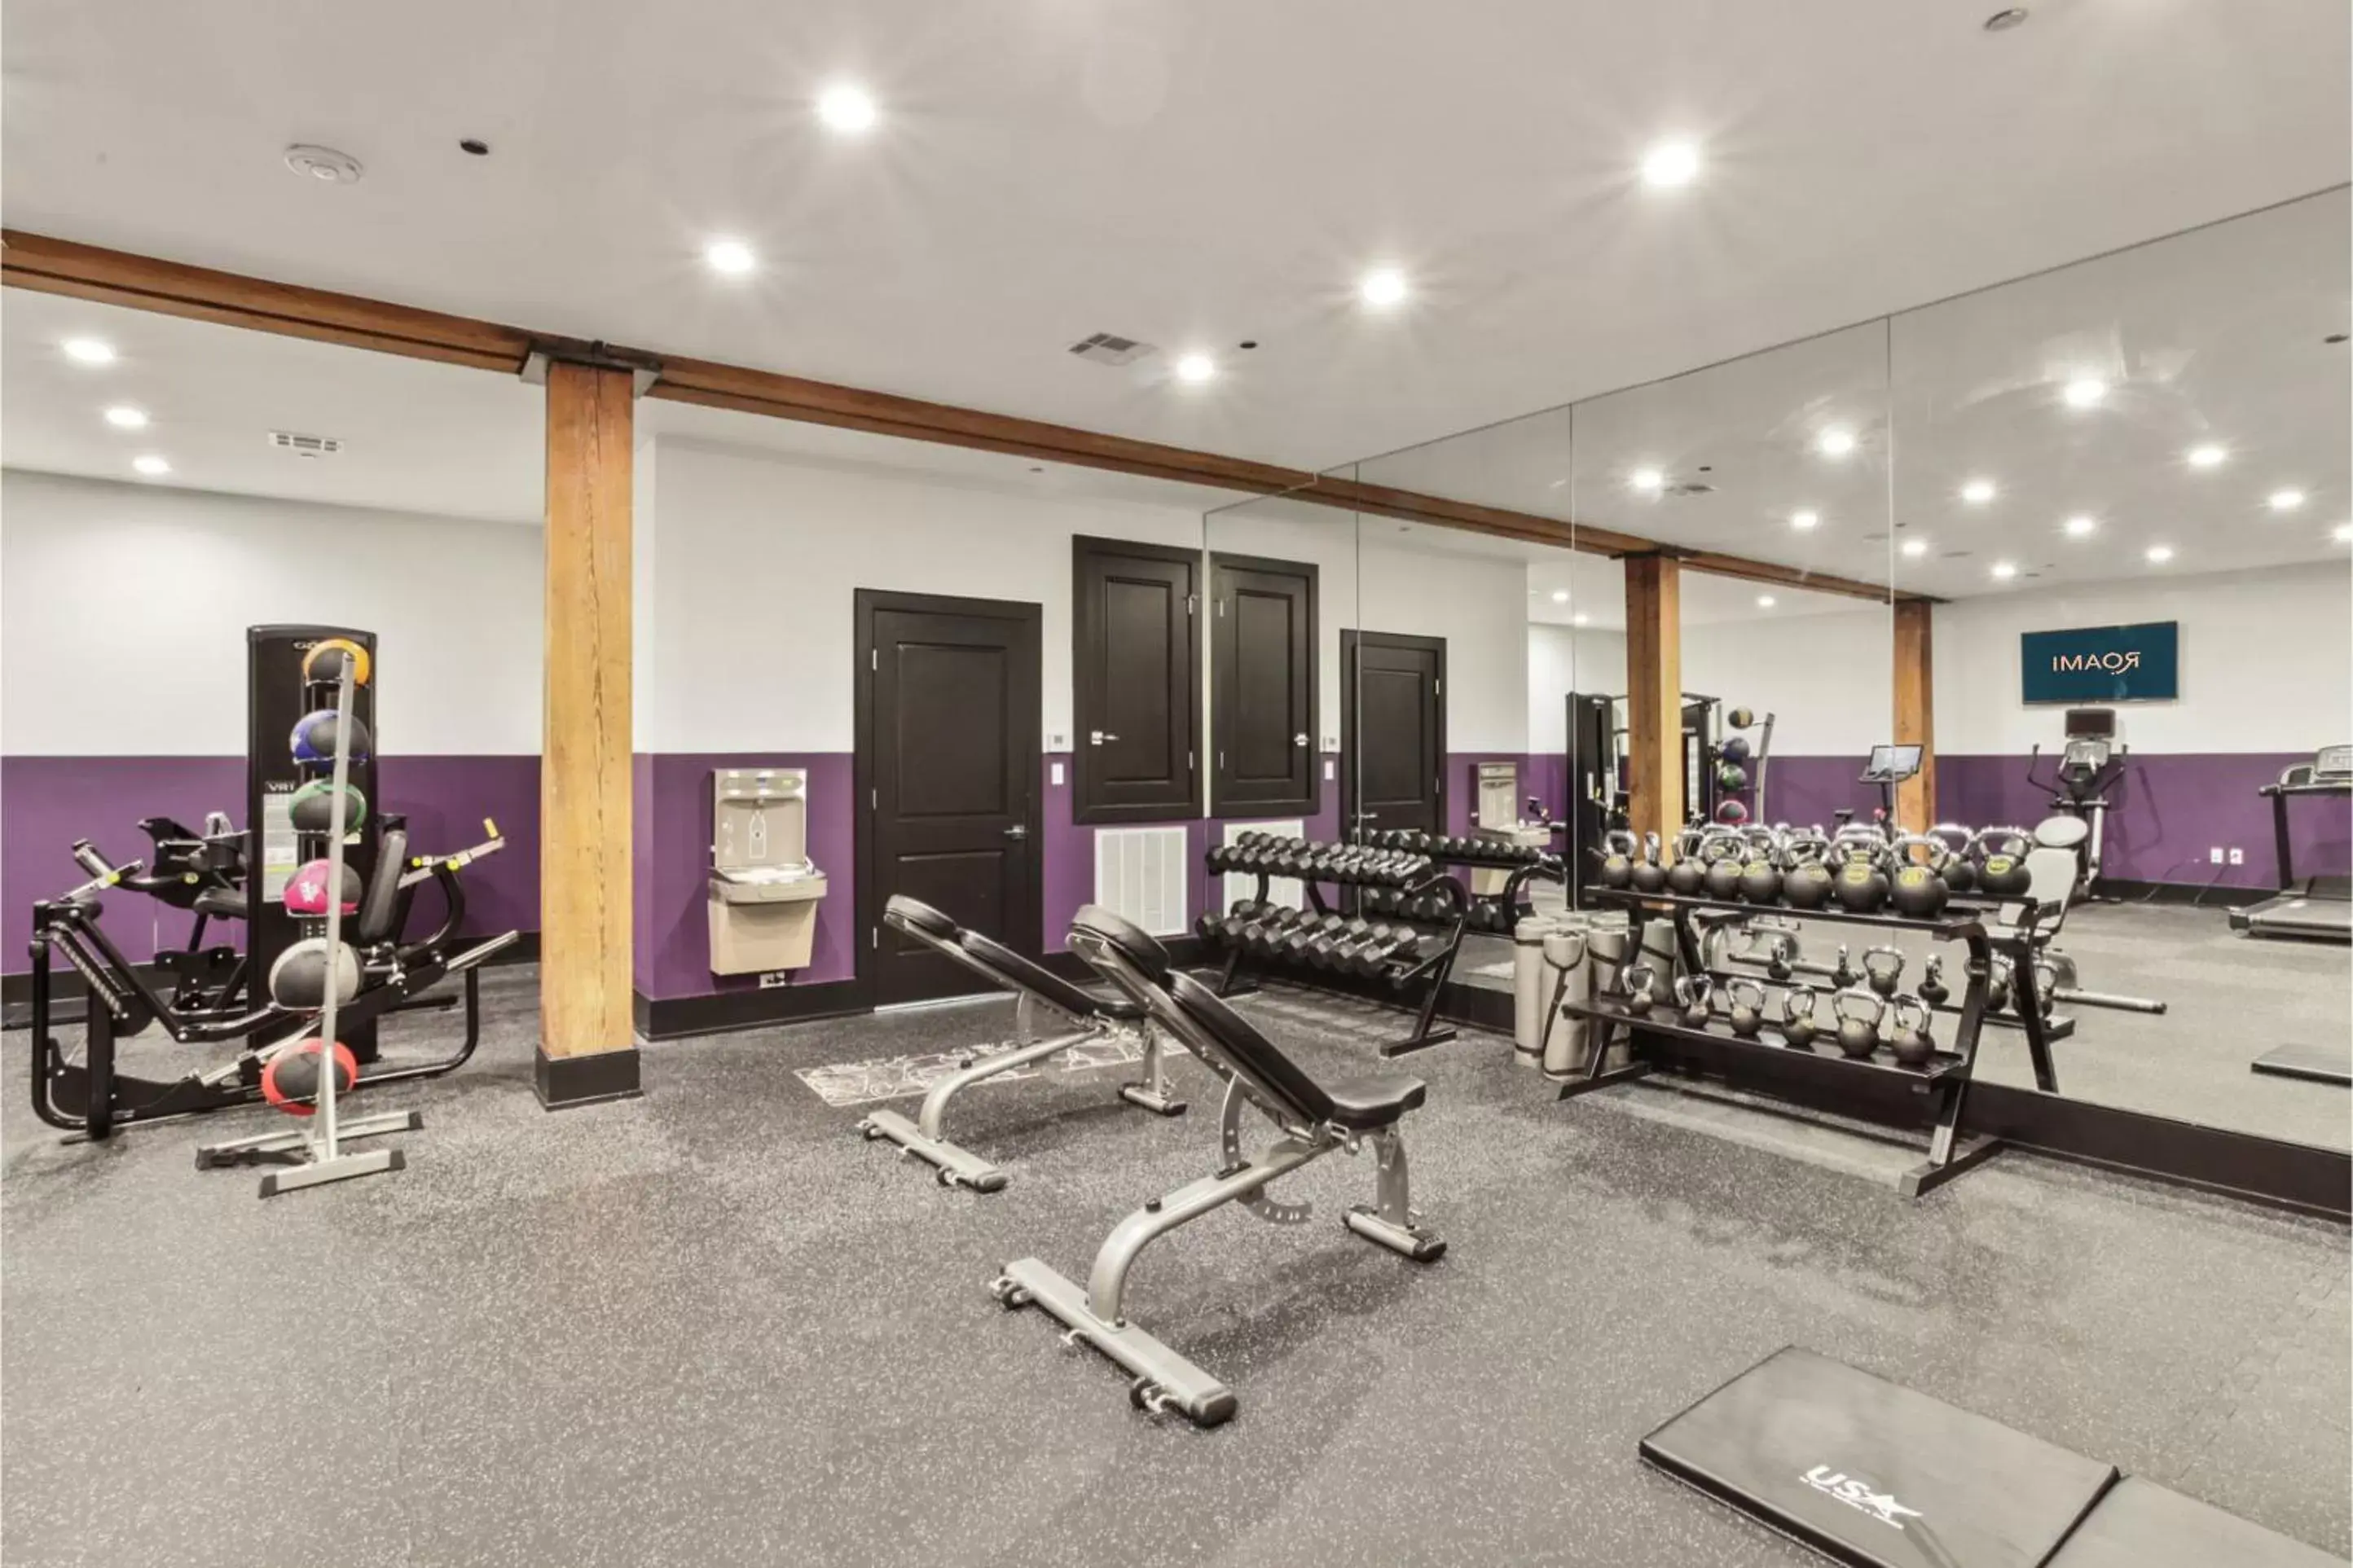 Fitness centre/facilities, Fitness Center/Facilities in Roami at The Brandywine